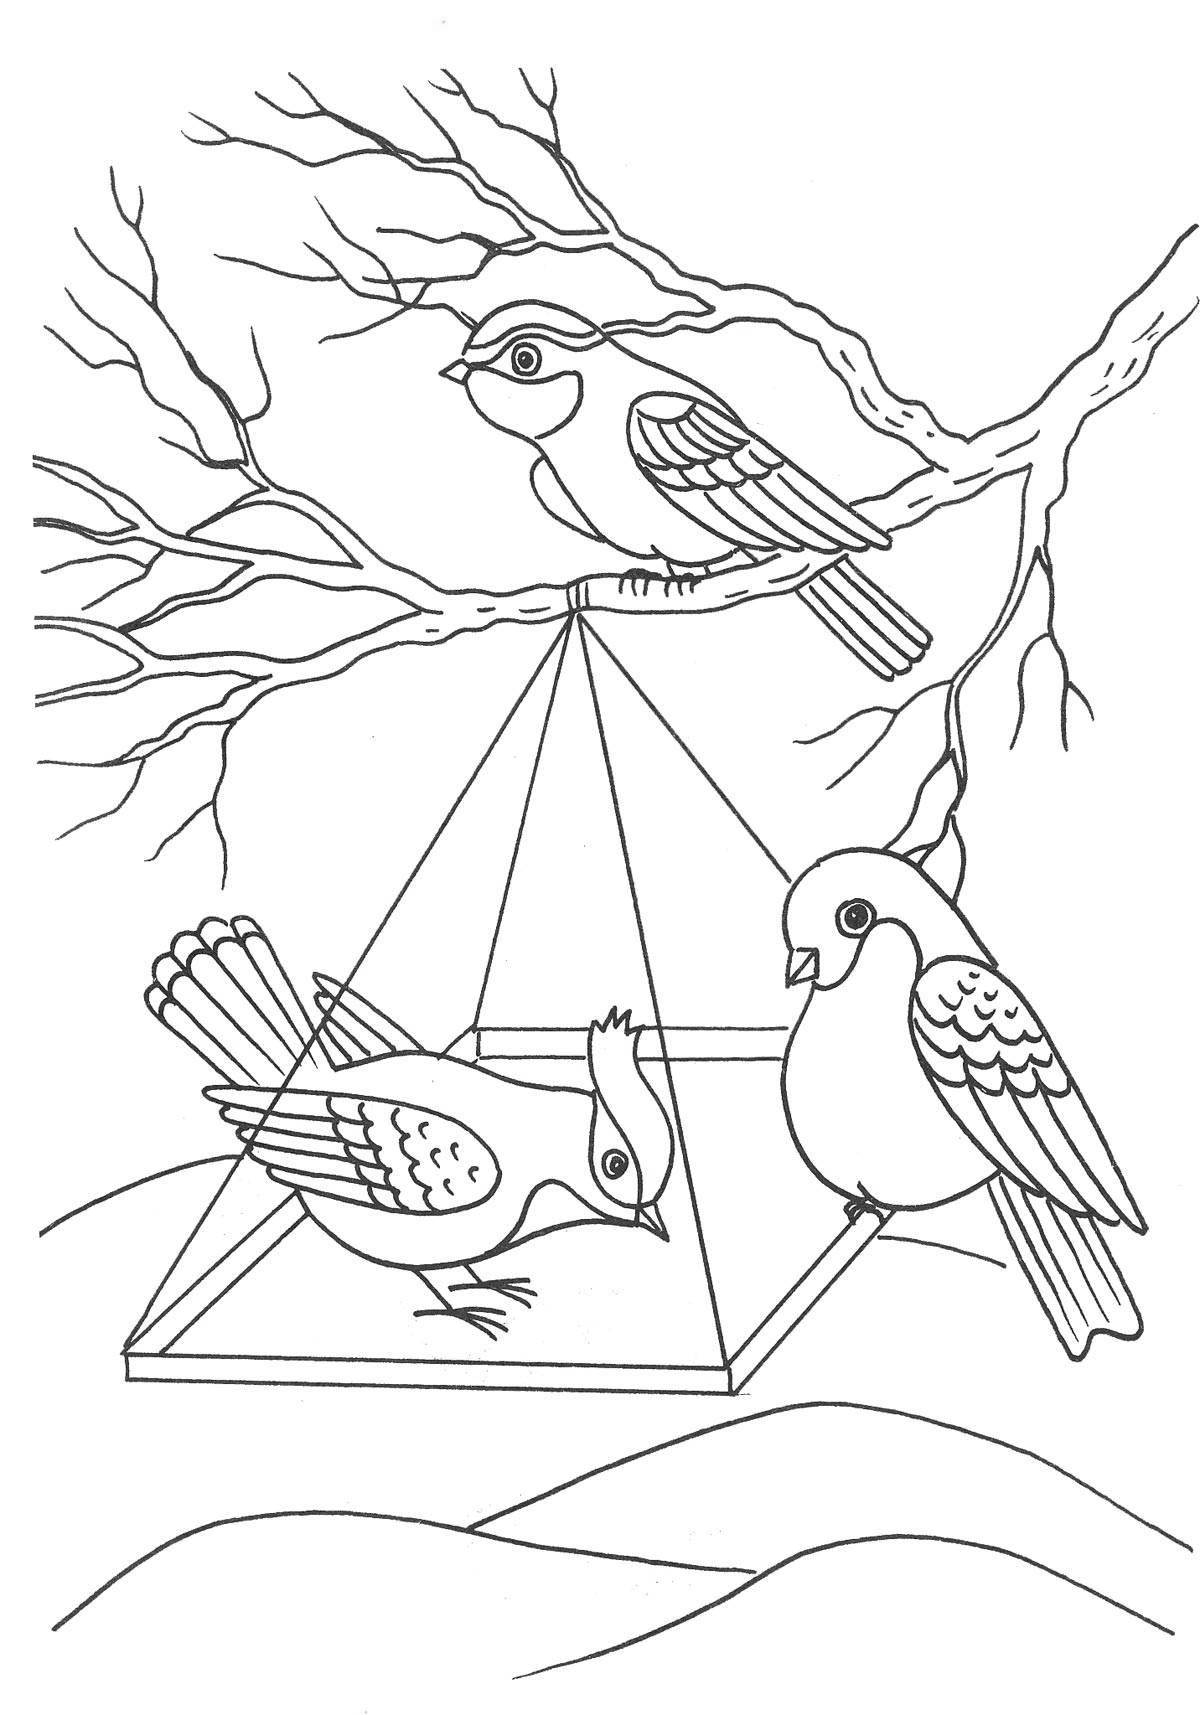 Playful coloring page of feeders for the little ones